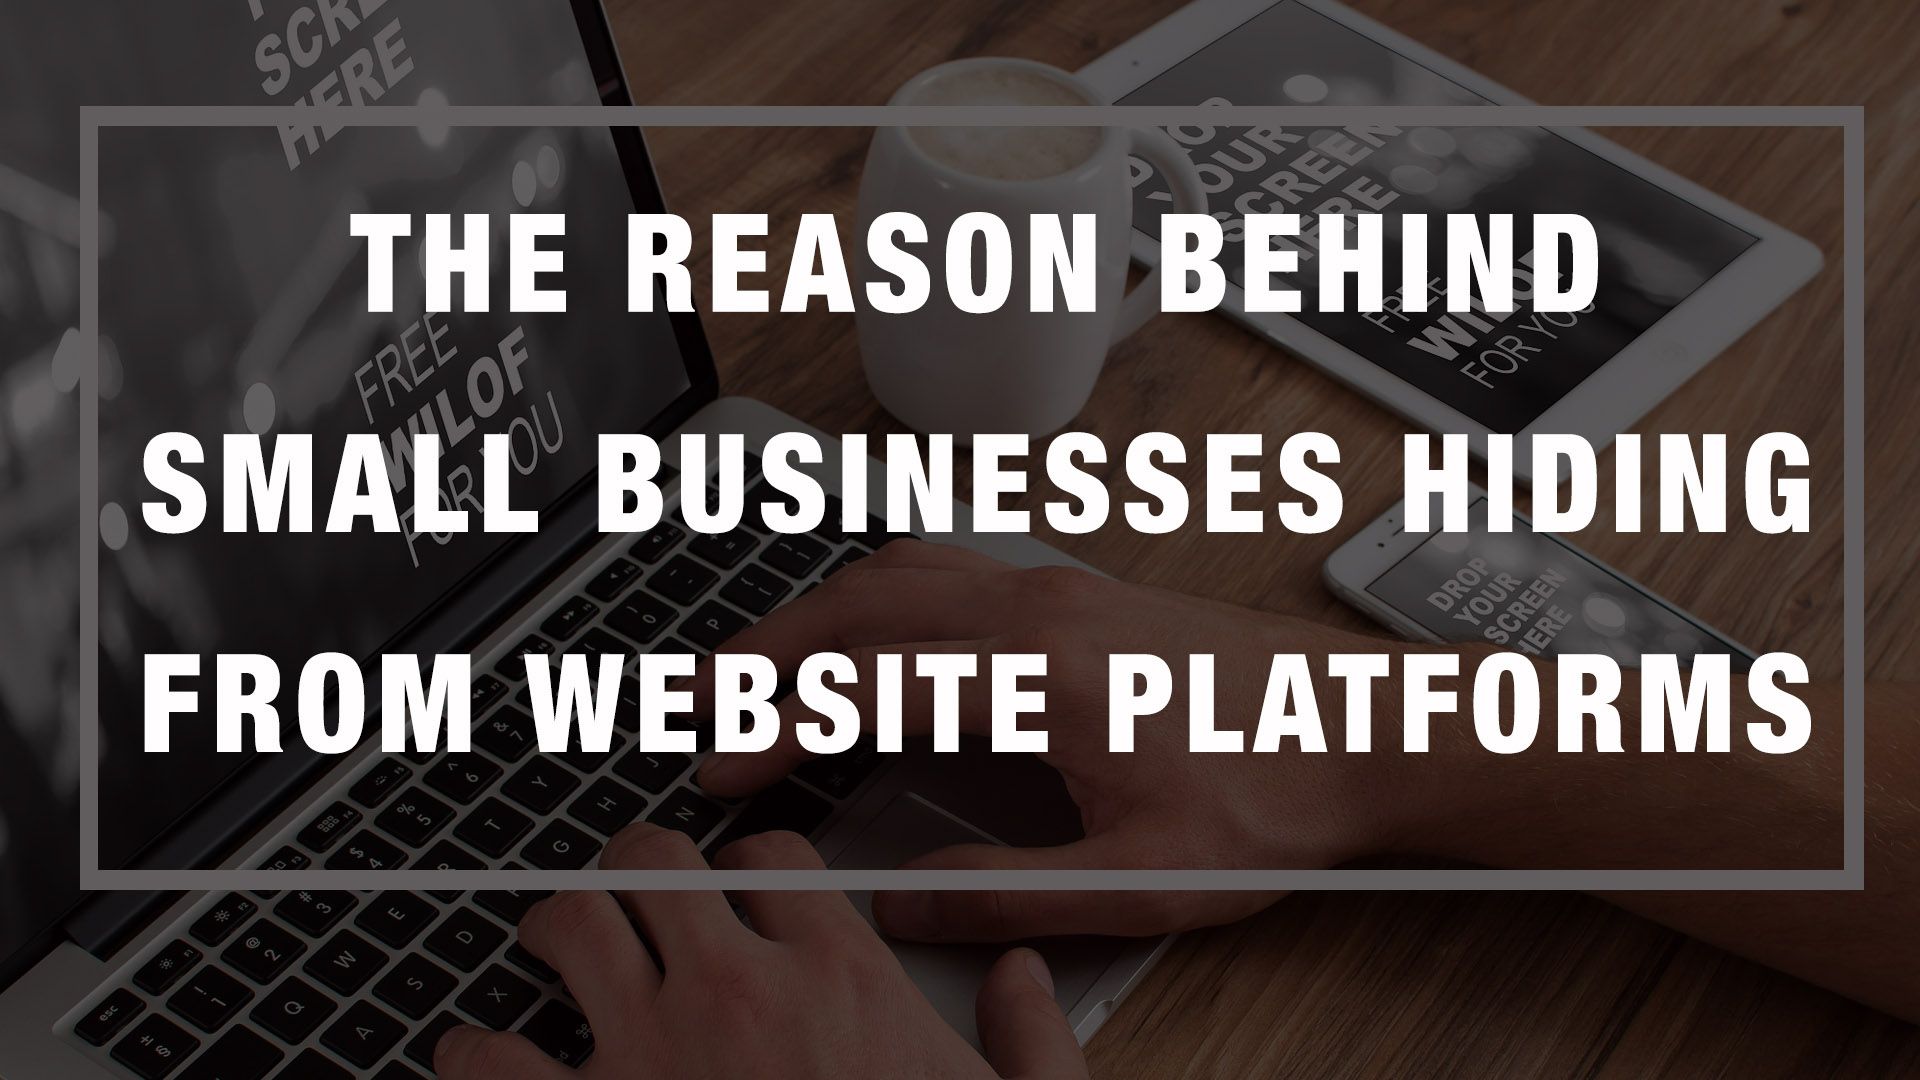 Here’s Why Some Small Businesses Are Hiding From Website Platforms